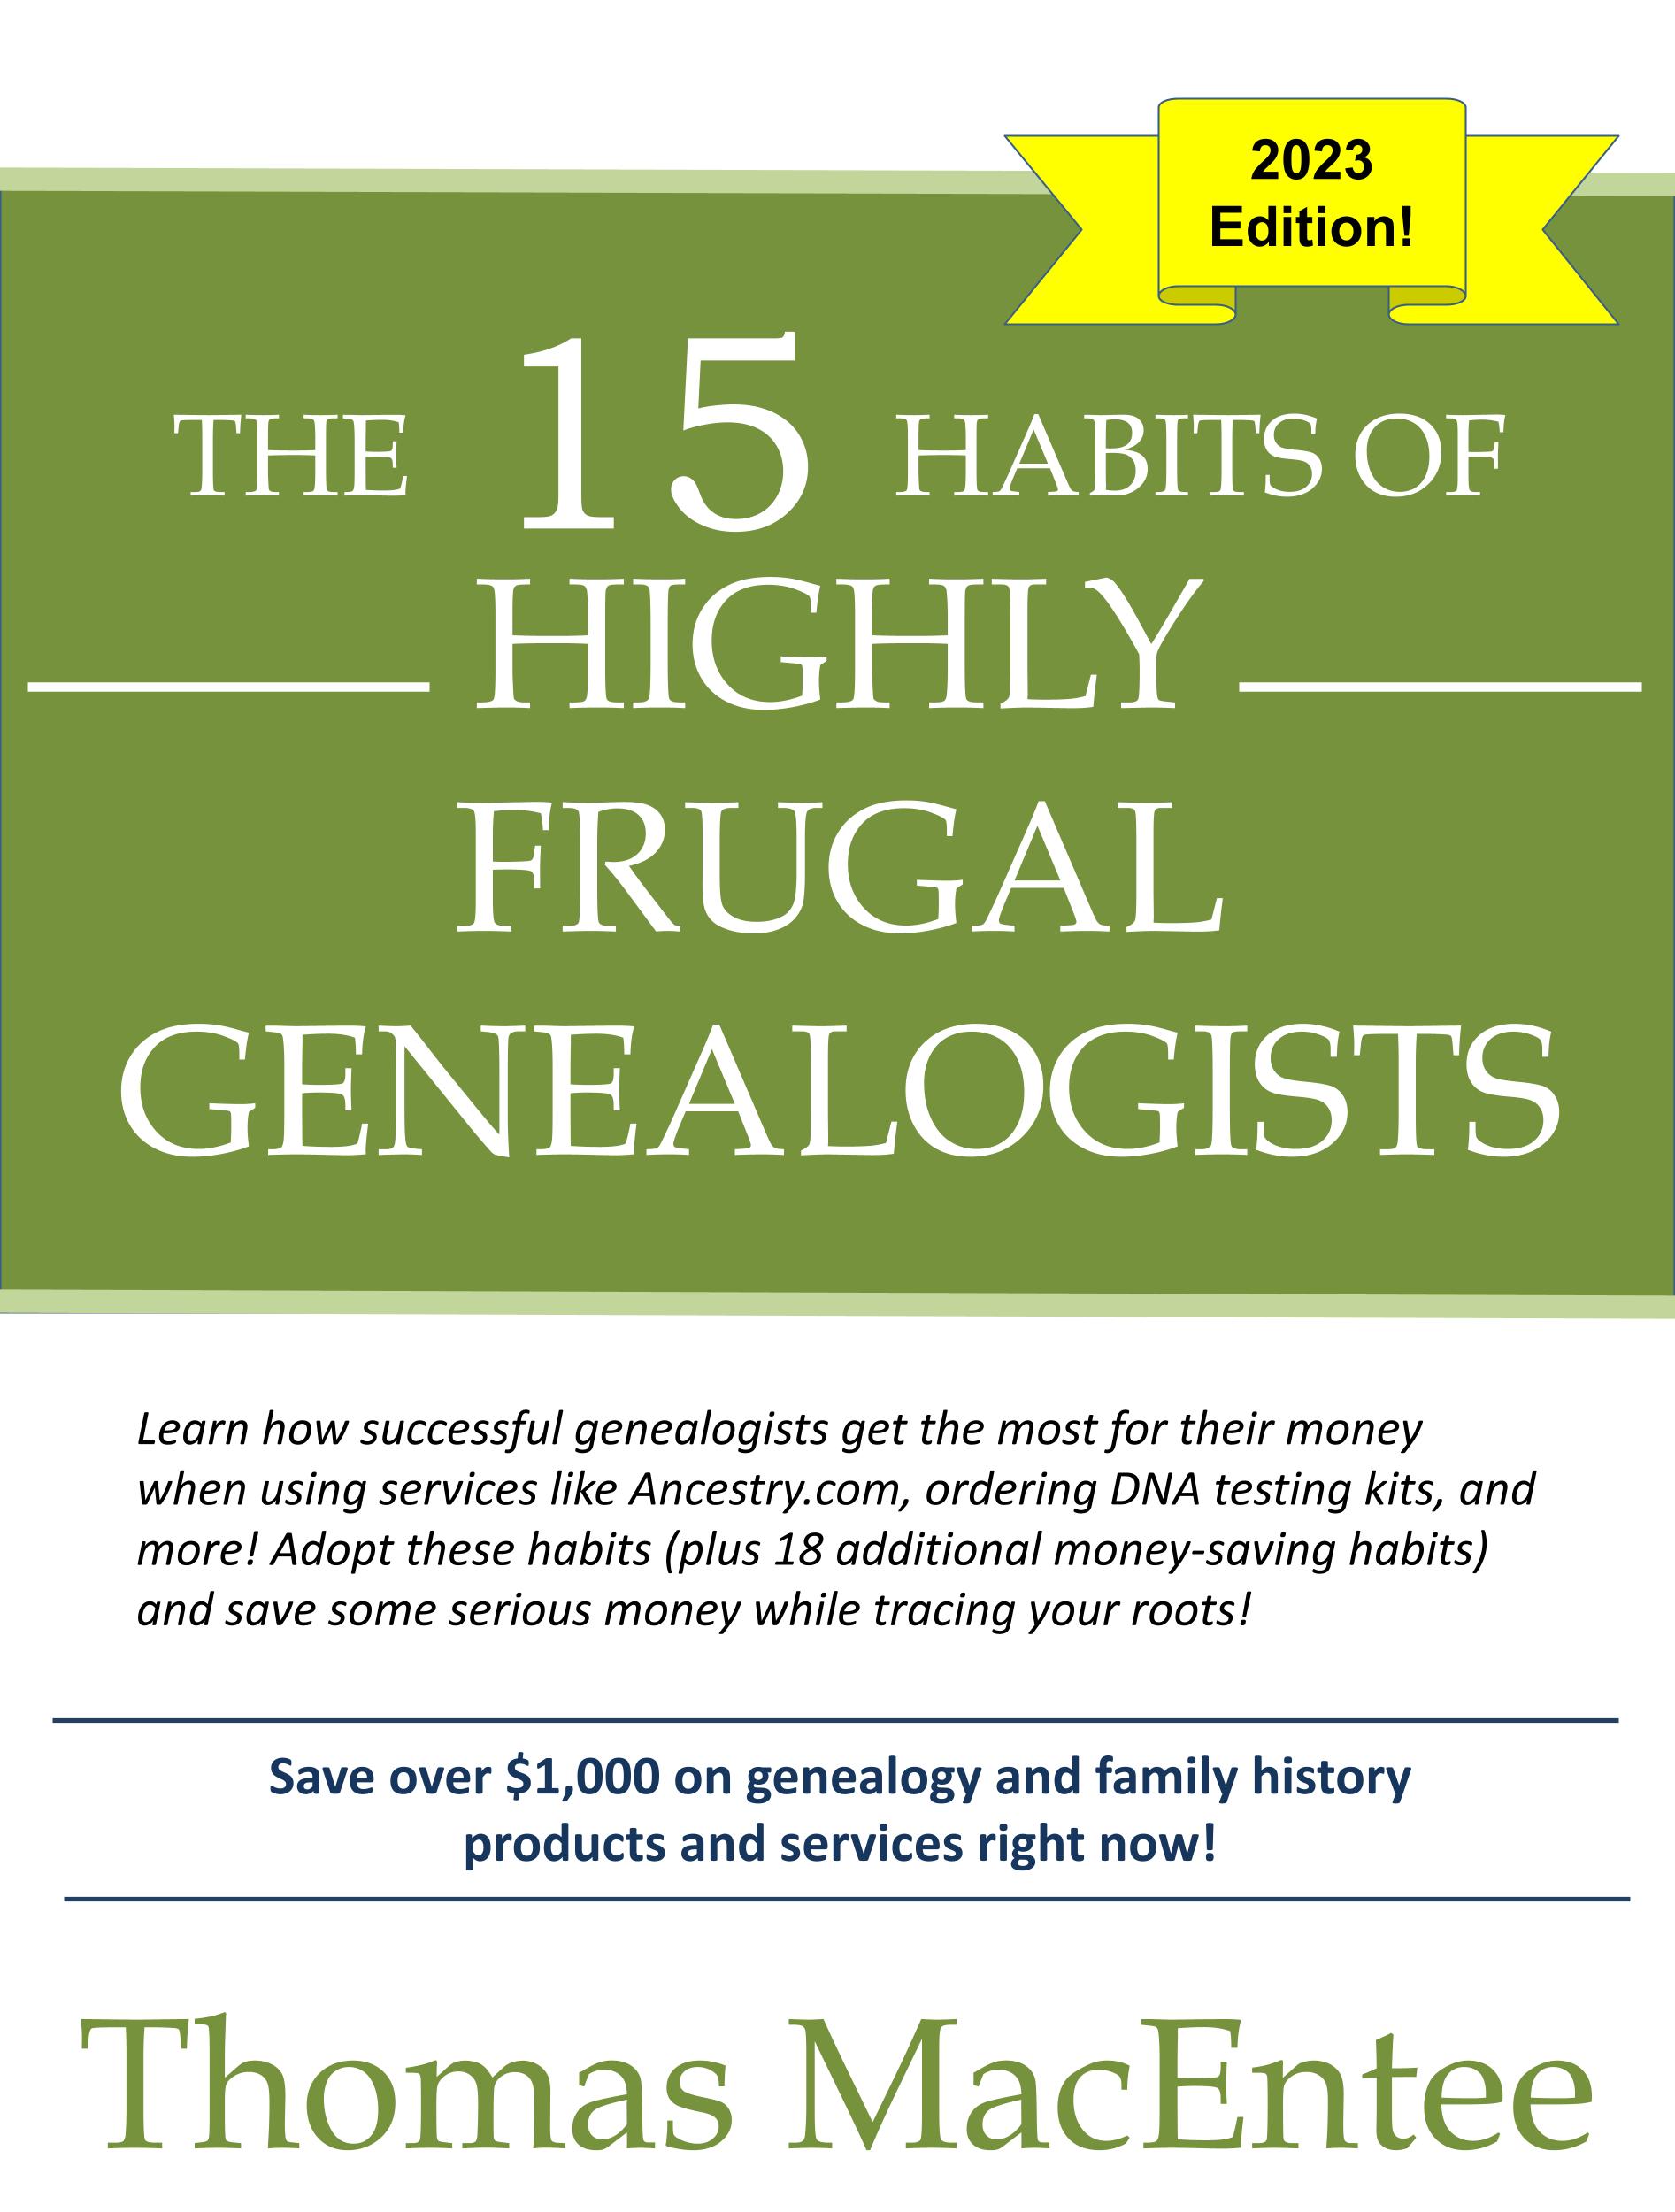 The 15 Habits of Highly Frugal Genealogists 2023 Edition - FREE EBOOK!